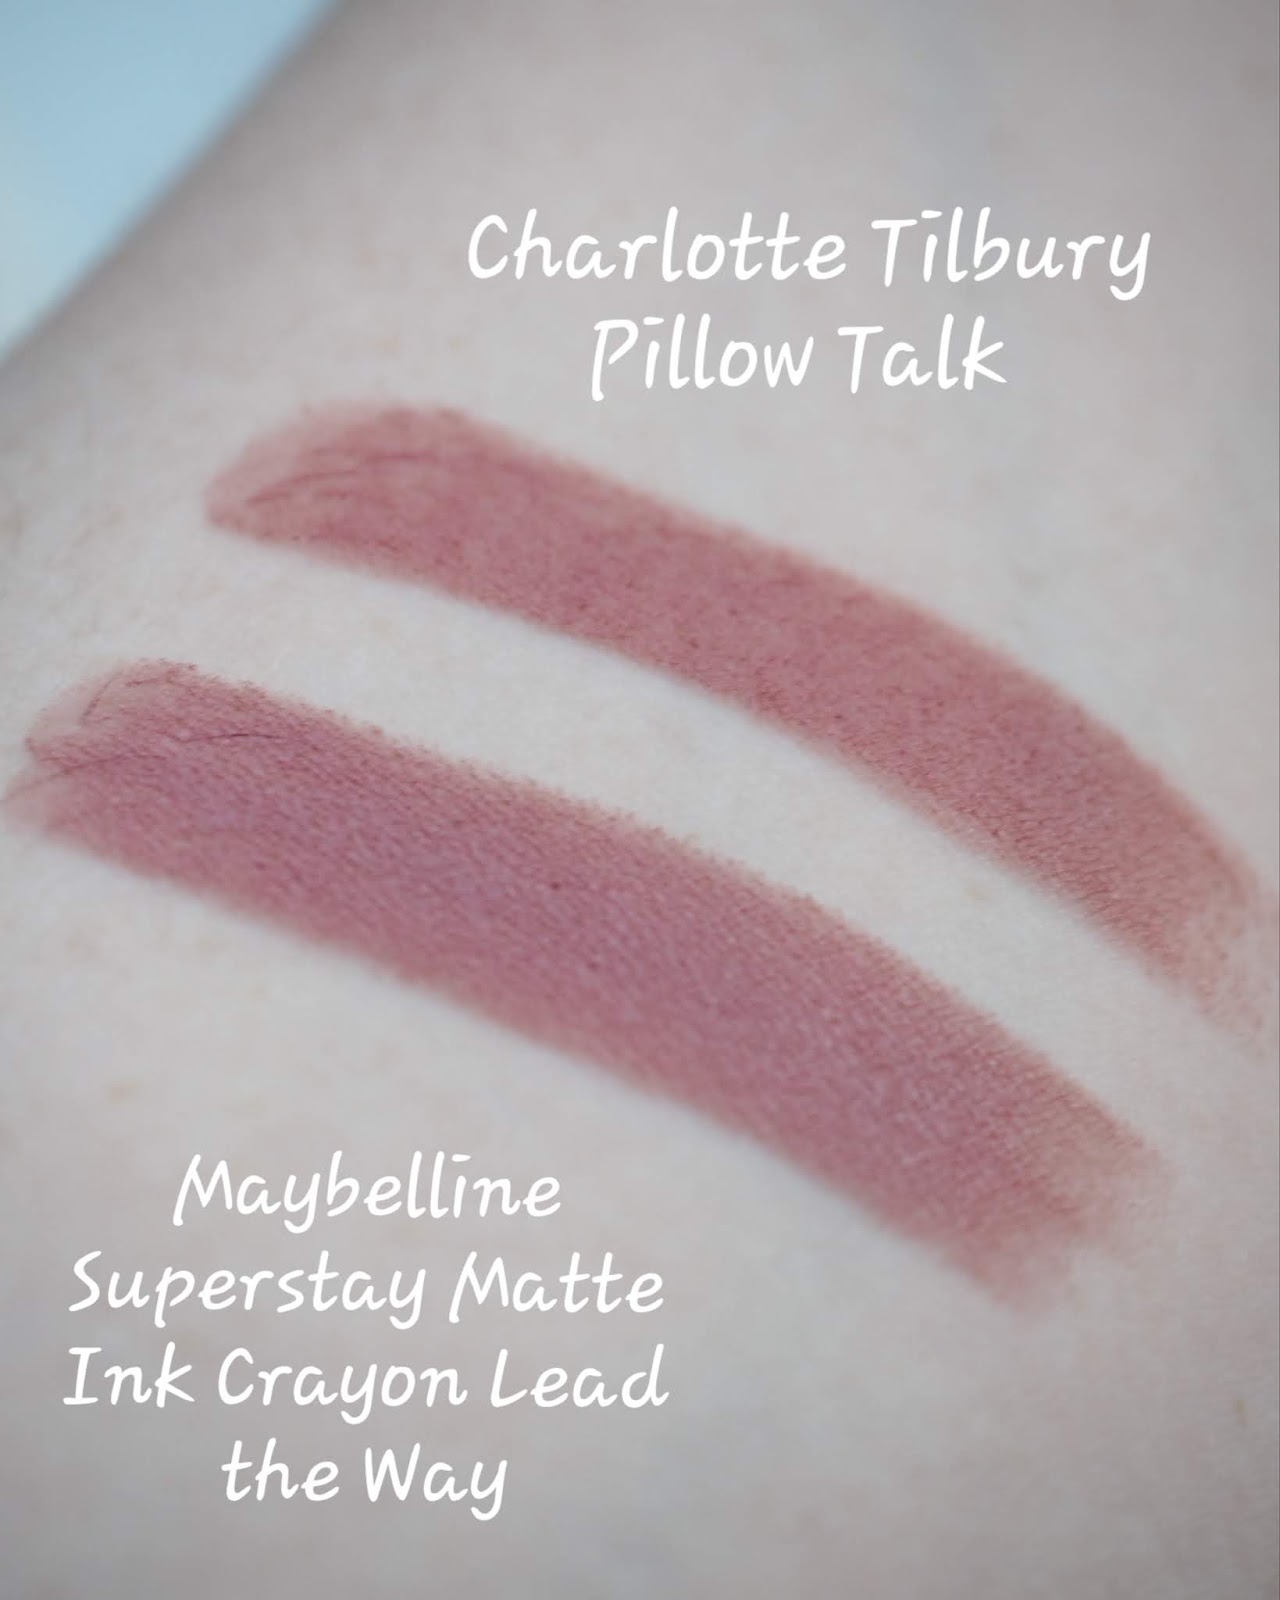 Charlotte Tilbury Pillow Talk Lipstick Review and Dupe - Beauty and Bentley